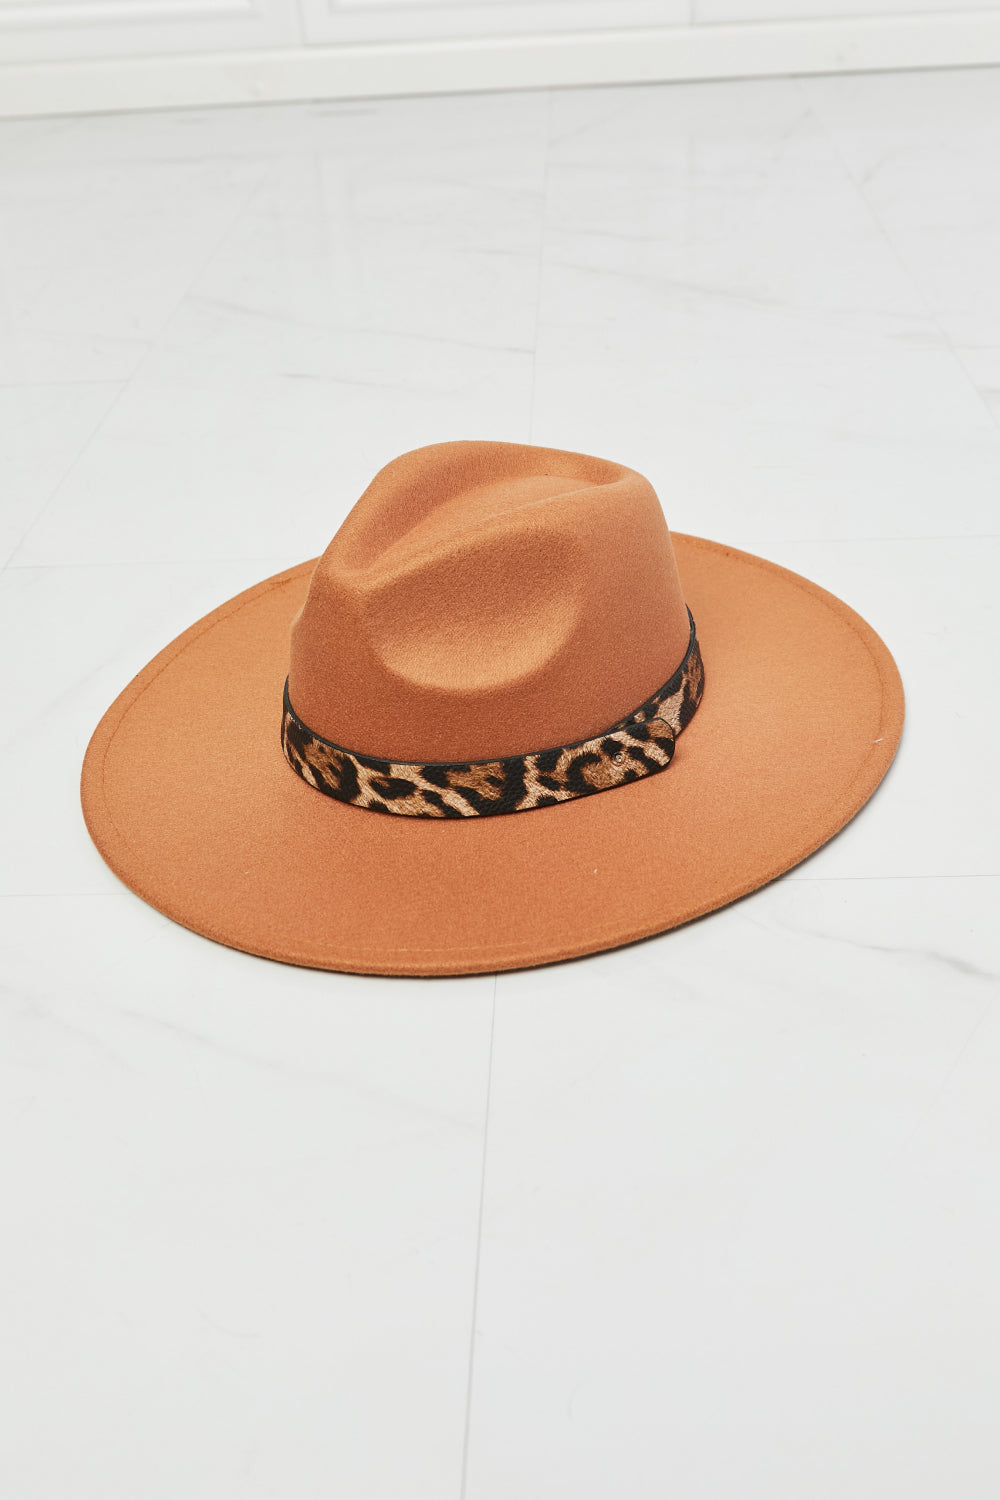 Fame In The Wild Leopard Detail Fedora Hat - Tigbuls Variety Fashion